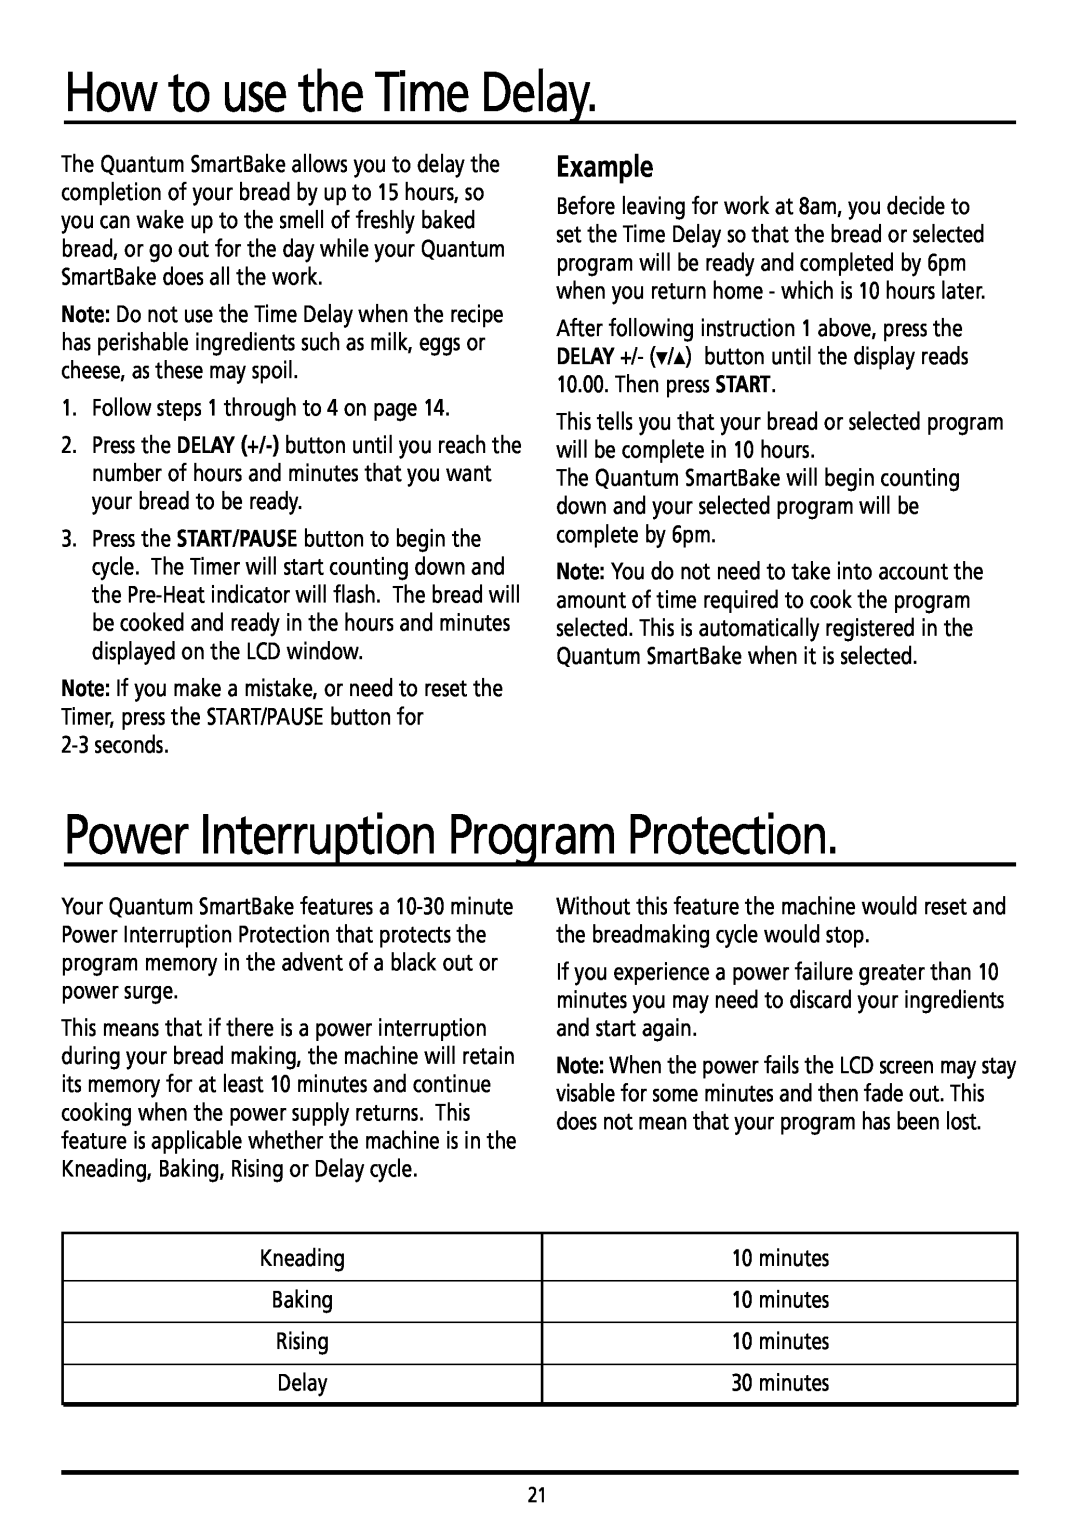 Sunbeam BM7800 manual How to use the Time Delay, Power Interruption Program Protection 